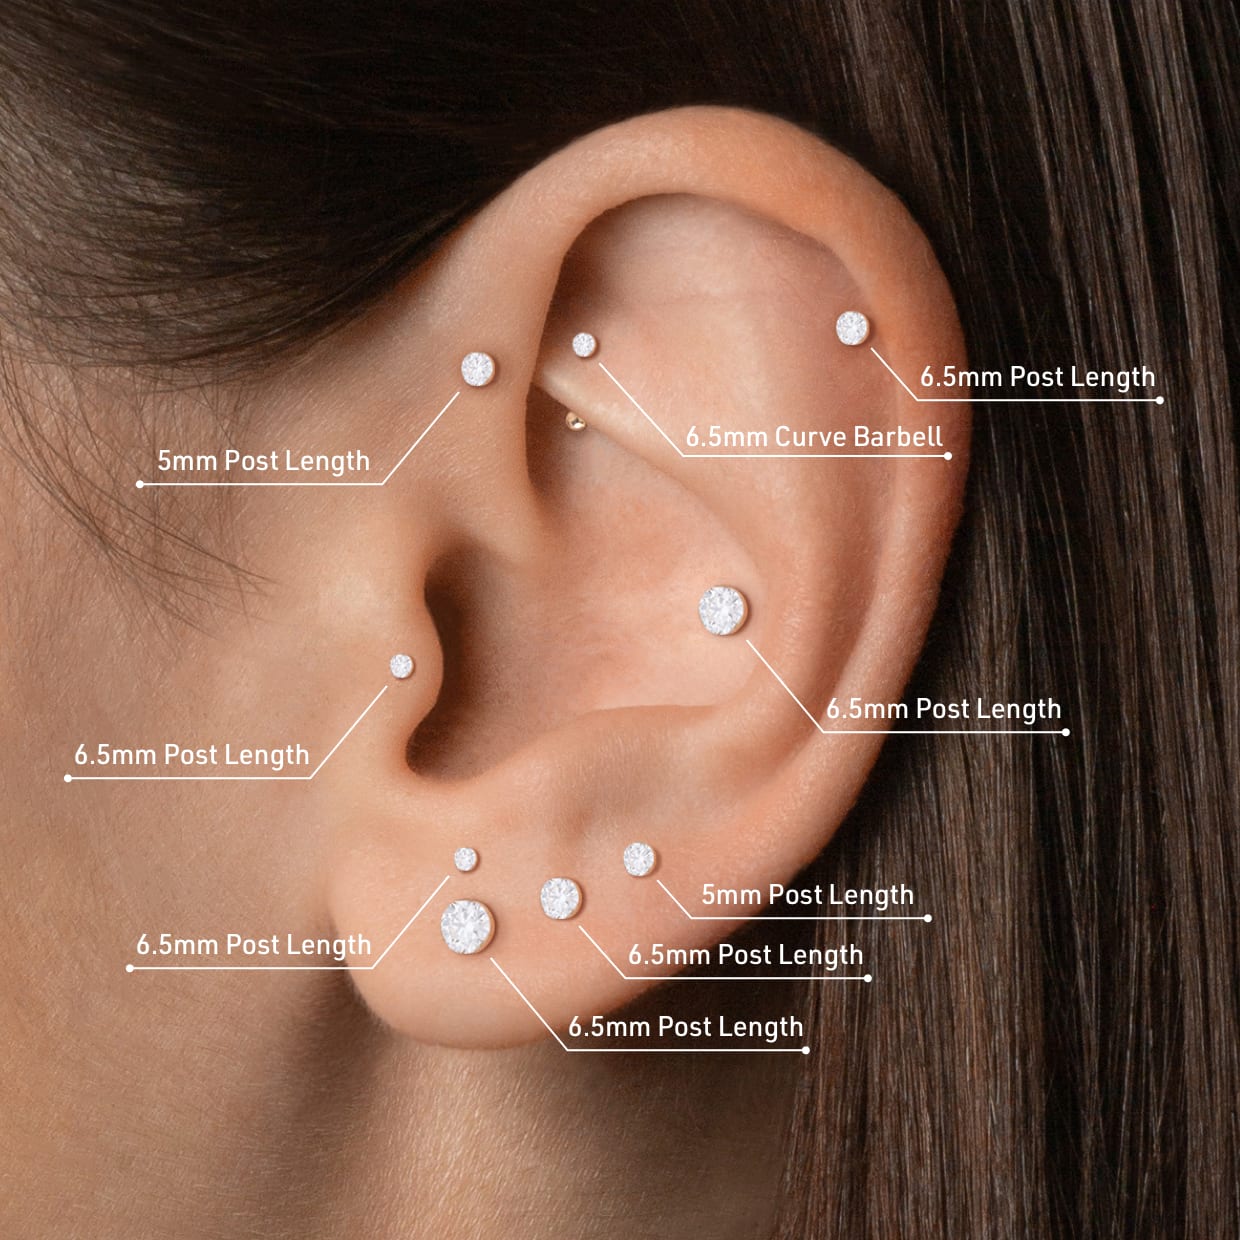 Earring post length size guide by piercing location with 5mm and 6.5mm studs or barbells